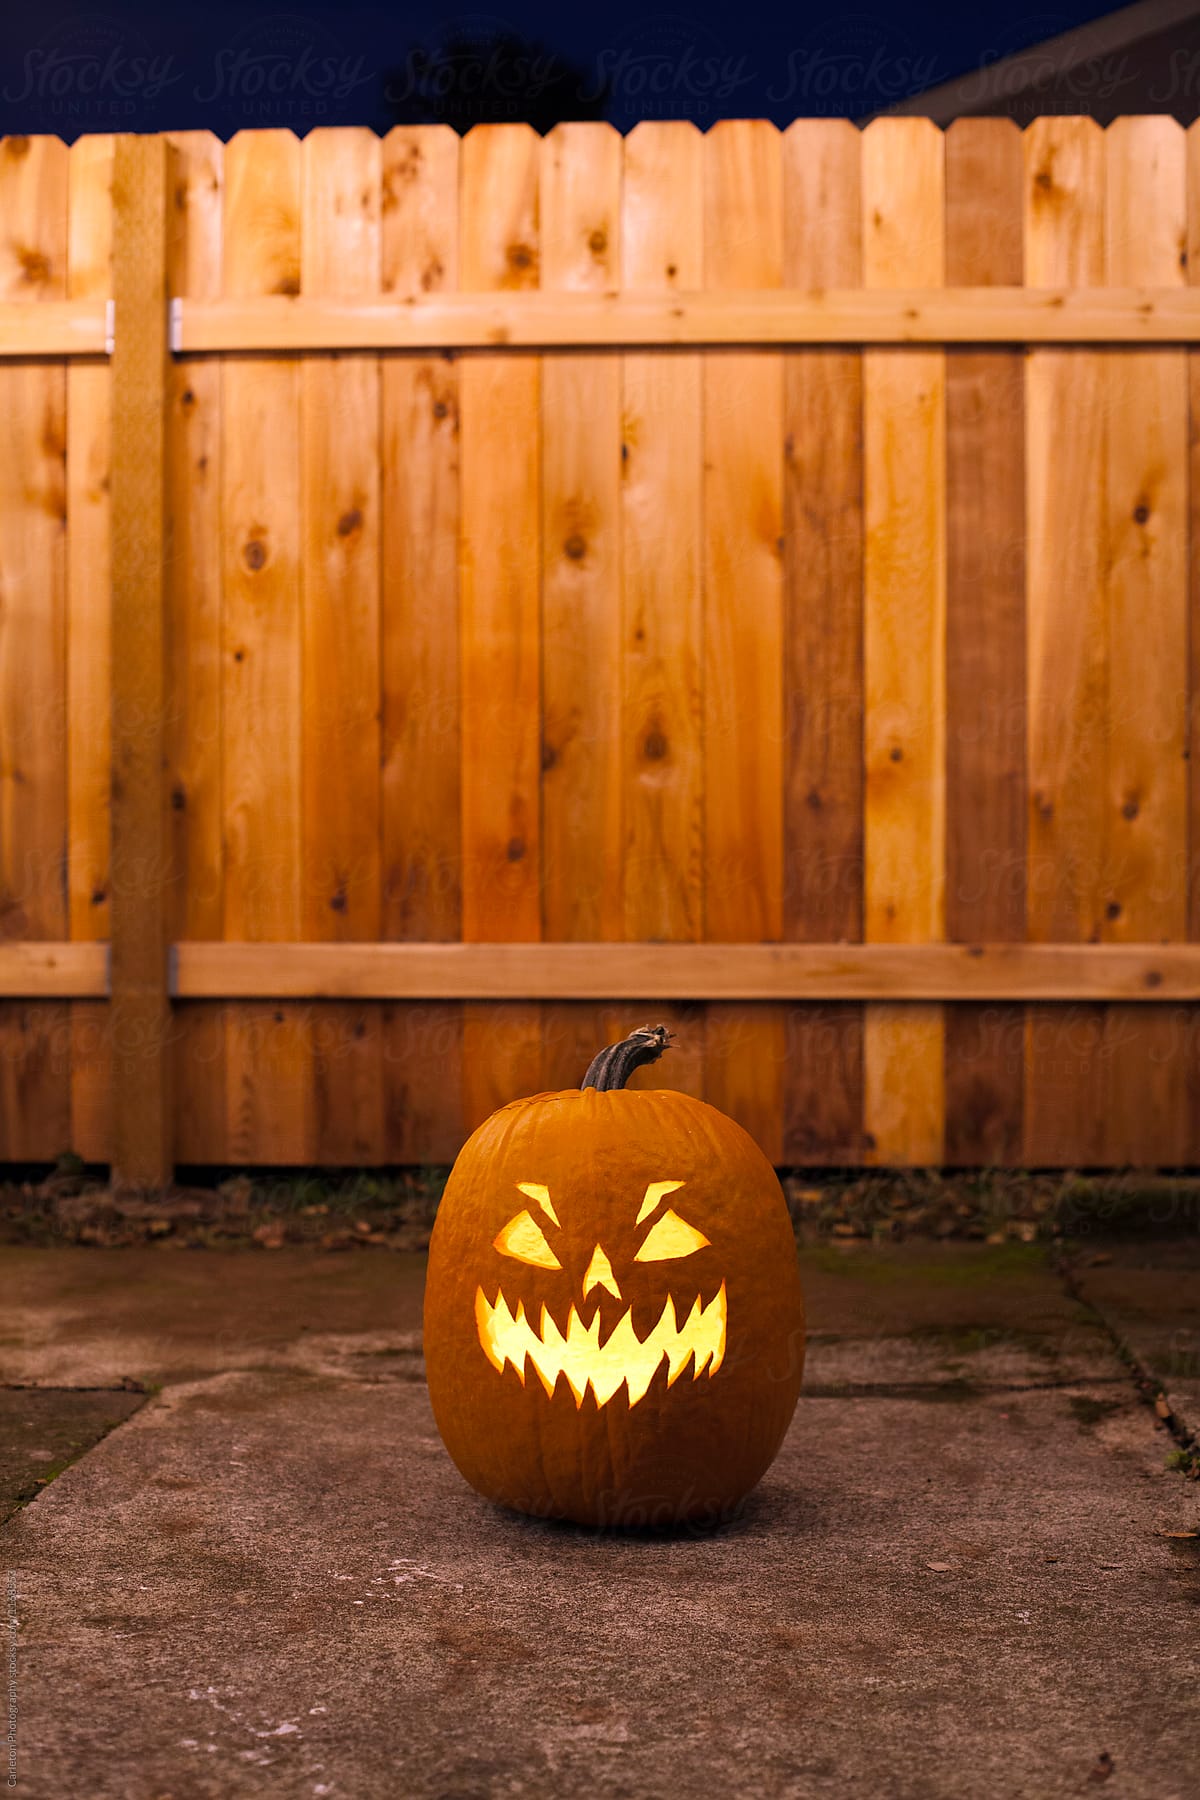 Jack-o-lantern lit up in front of a fence